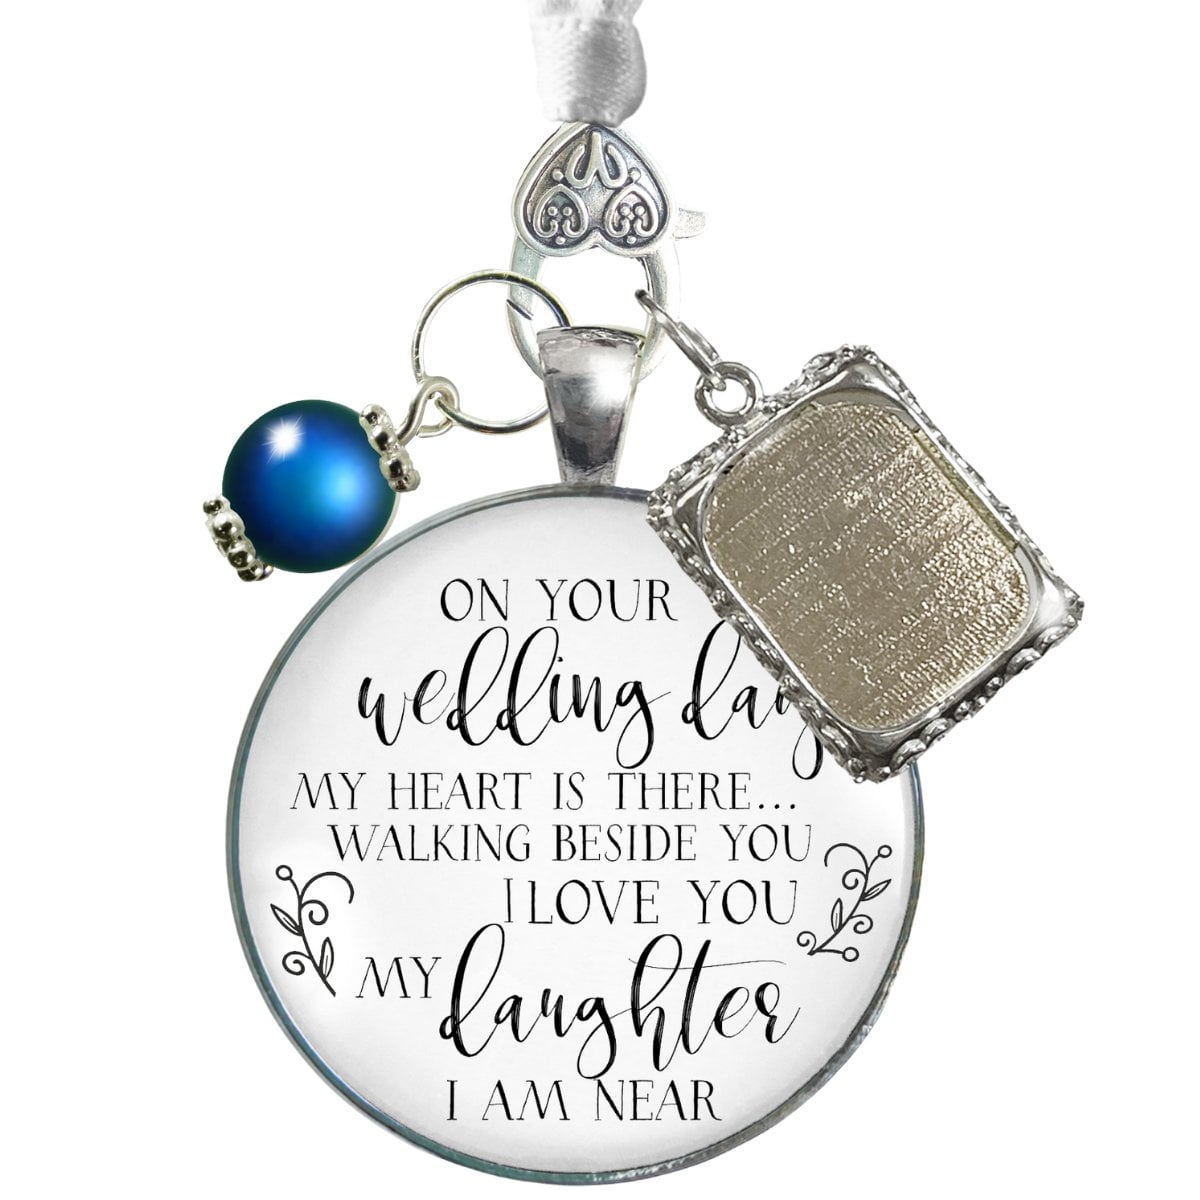 Memorial Wedding Bouquet Charm Mom and Dad You Walk Beside Me Every Day  Honor Parents 1 Photo Memory Frame Antique Silvertone White Glass Pendant